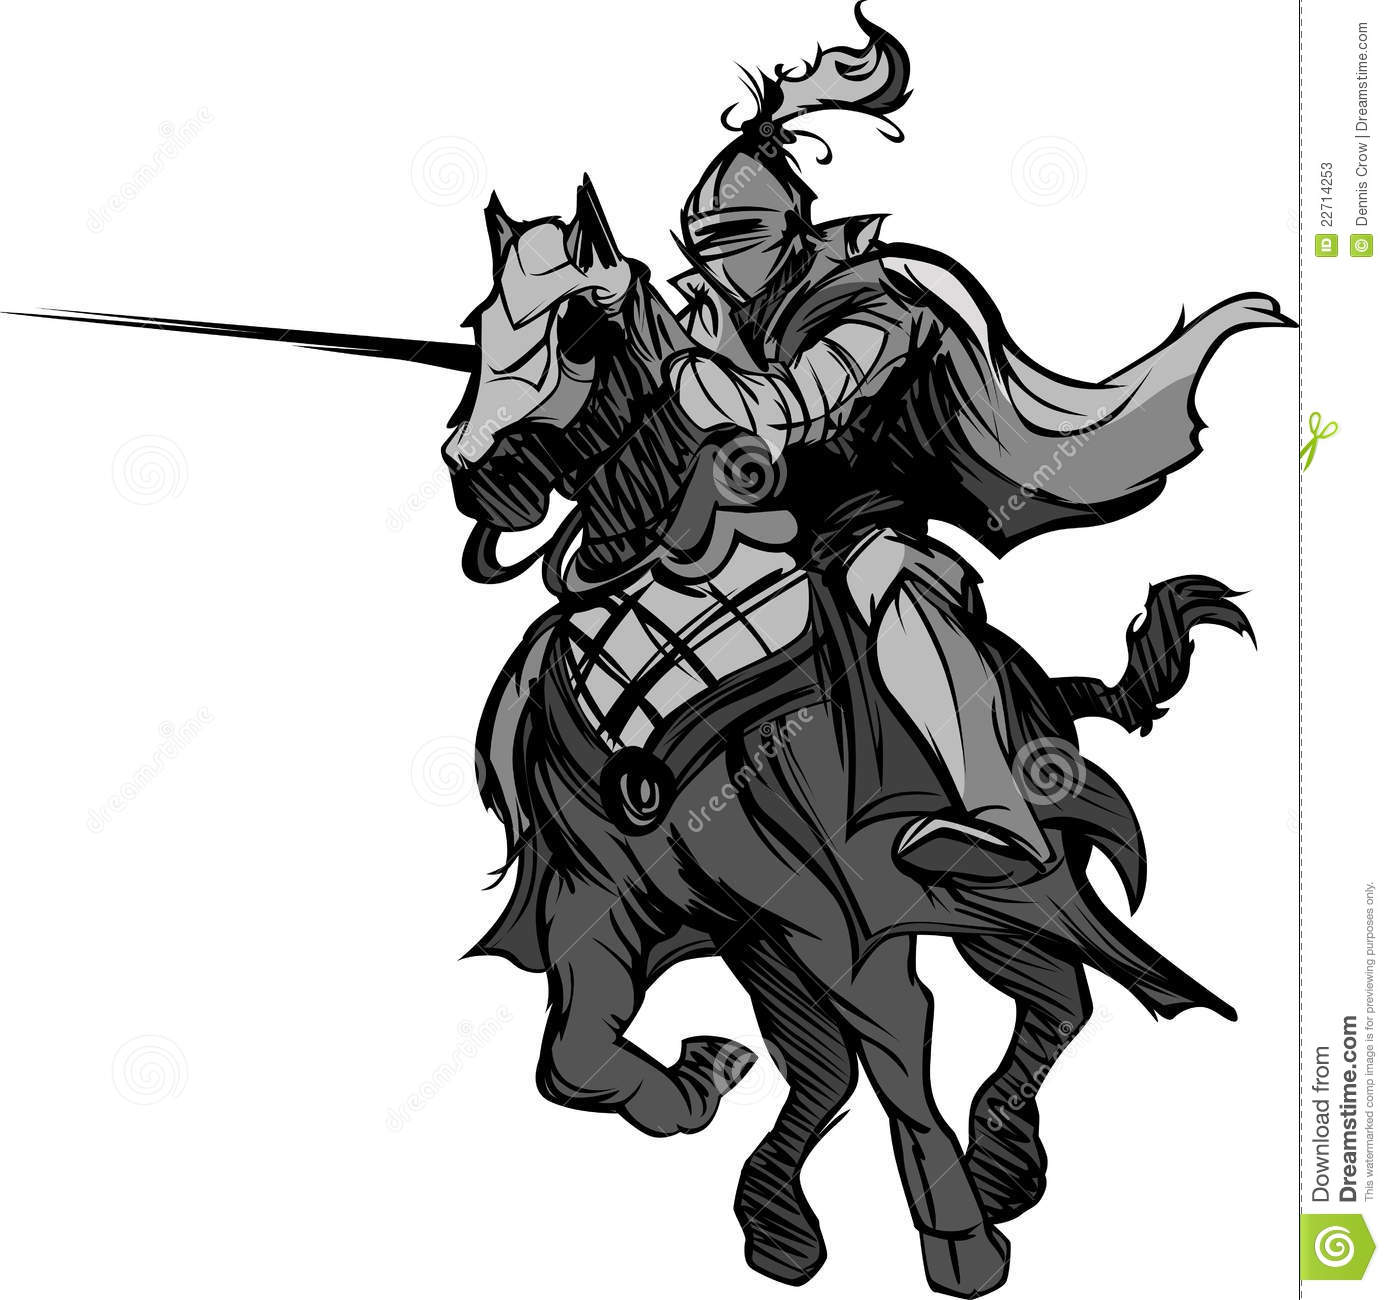 knight on a horse knight in full armor clipart etc horse knight on a 